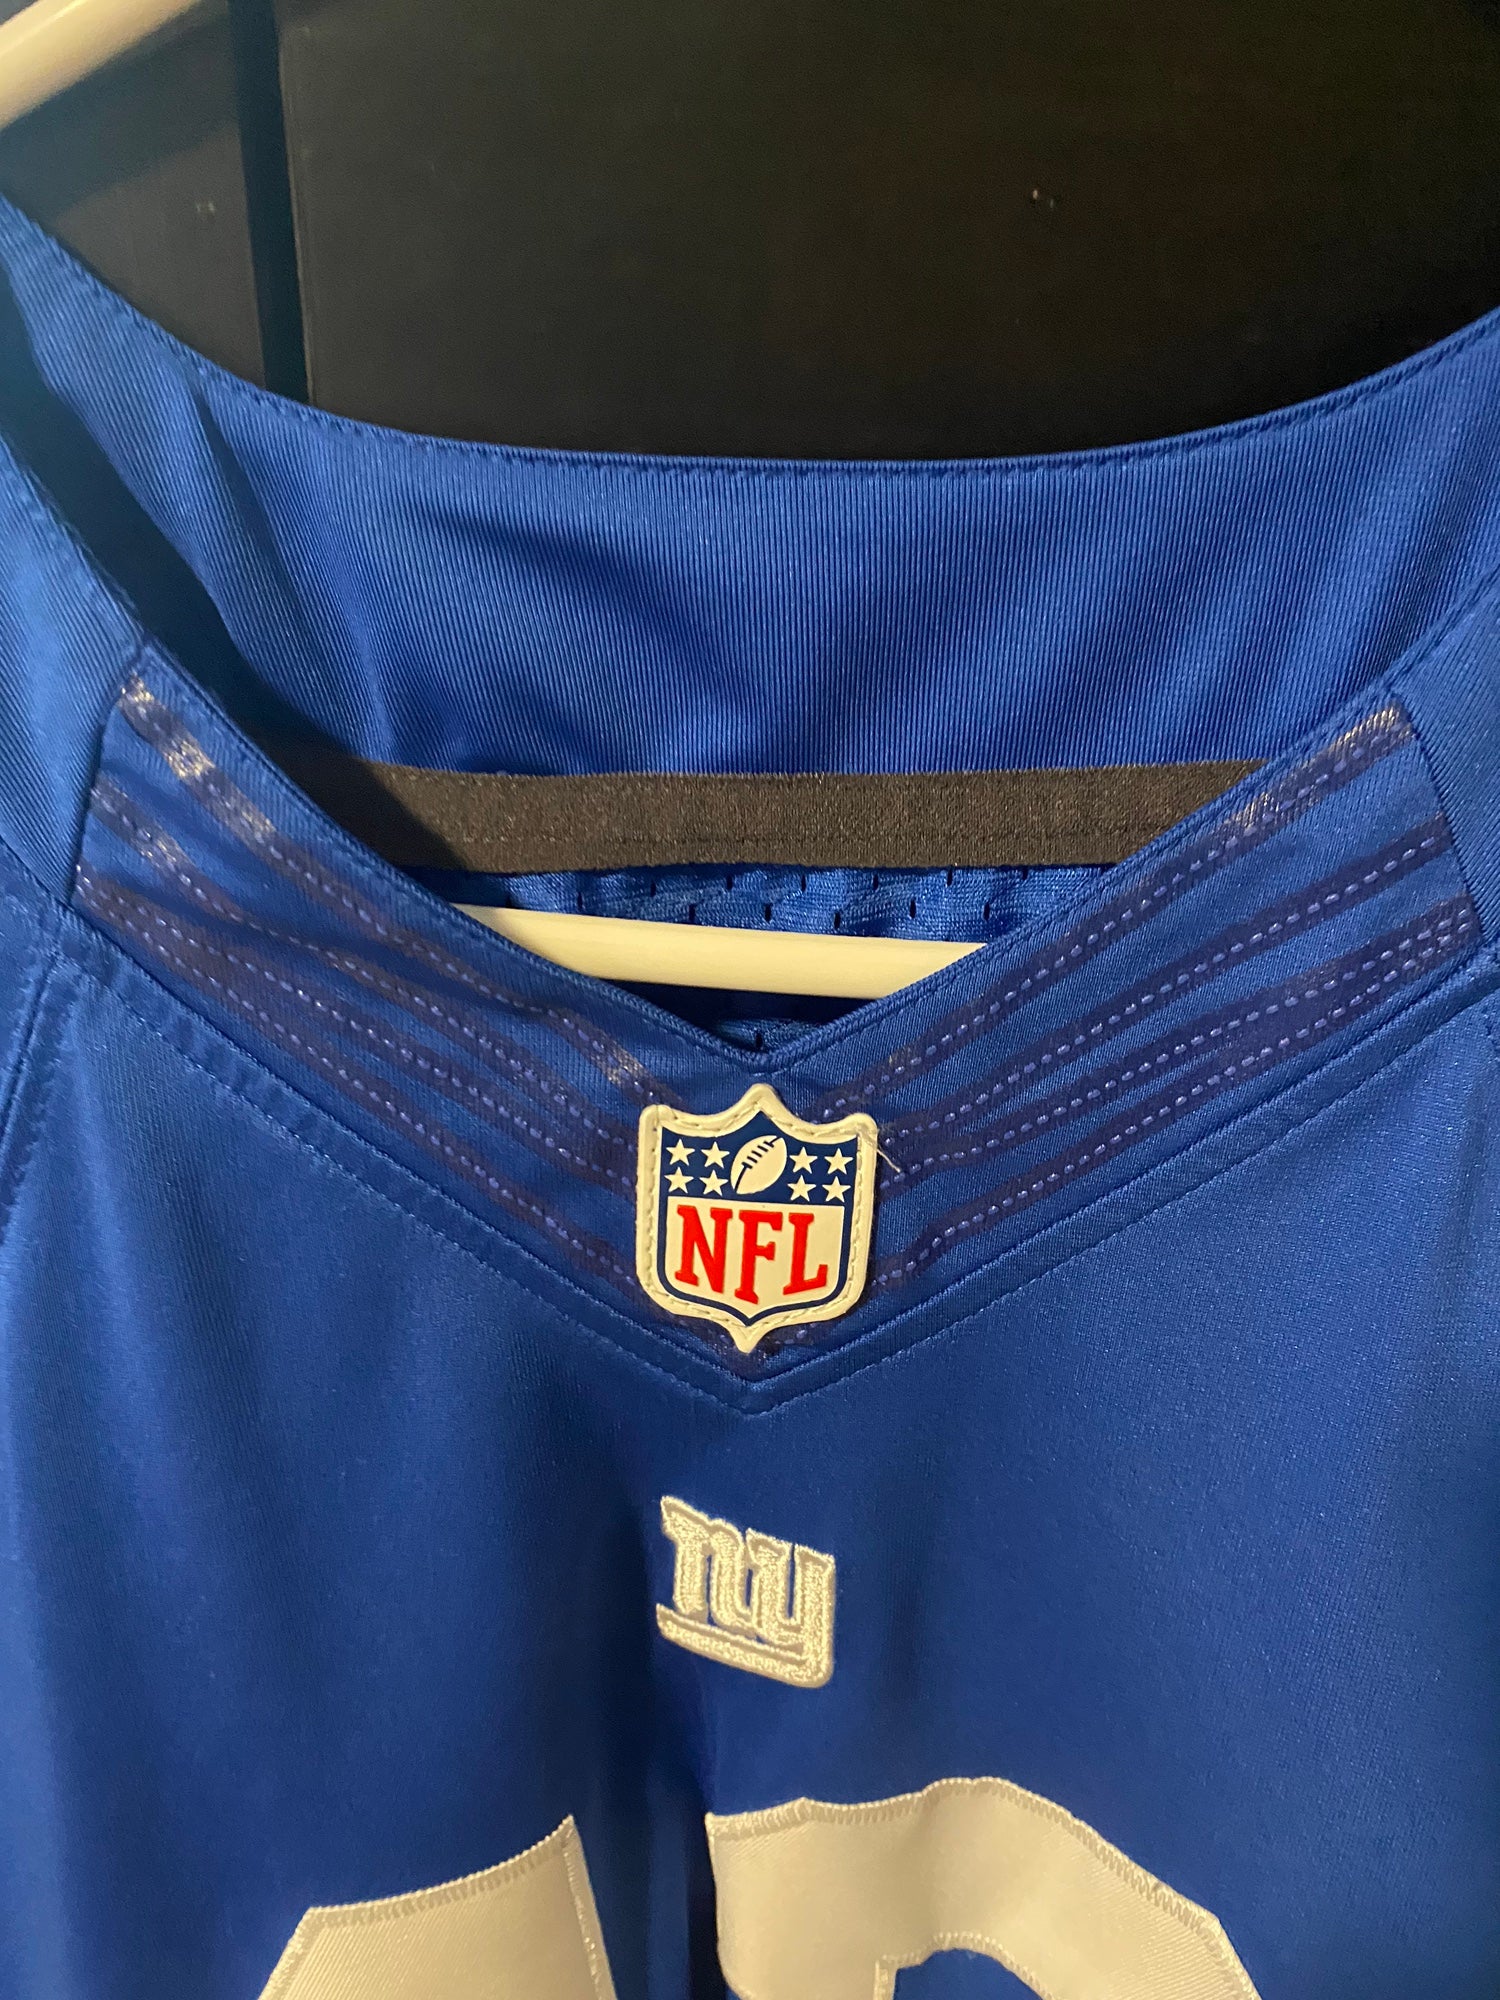 Authentic Odell Beckham Jr. Giants jersey